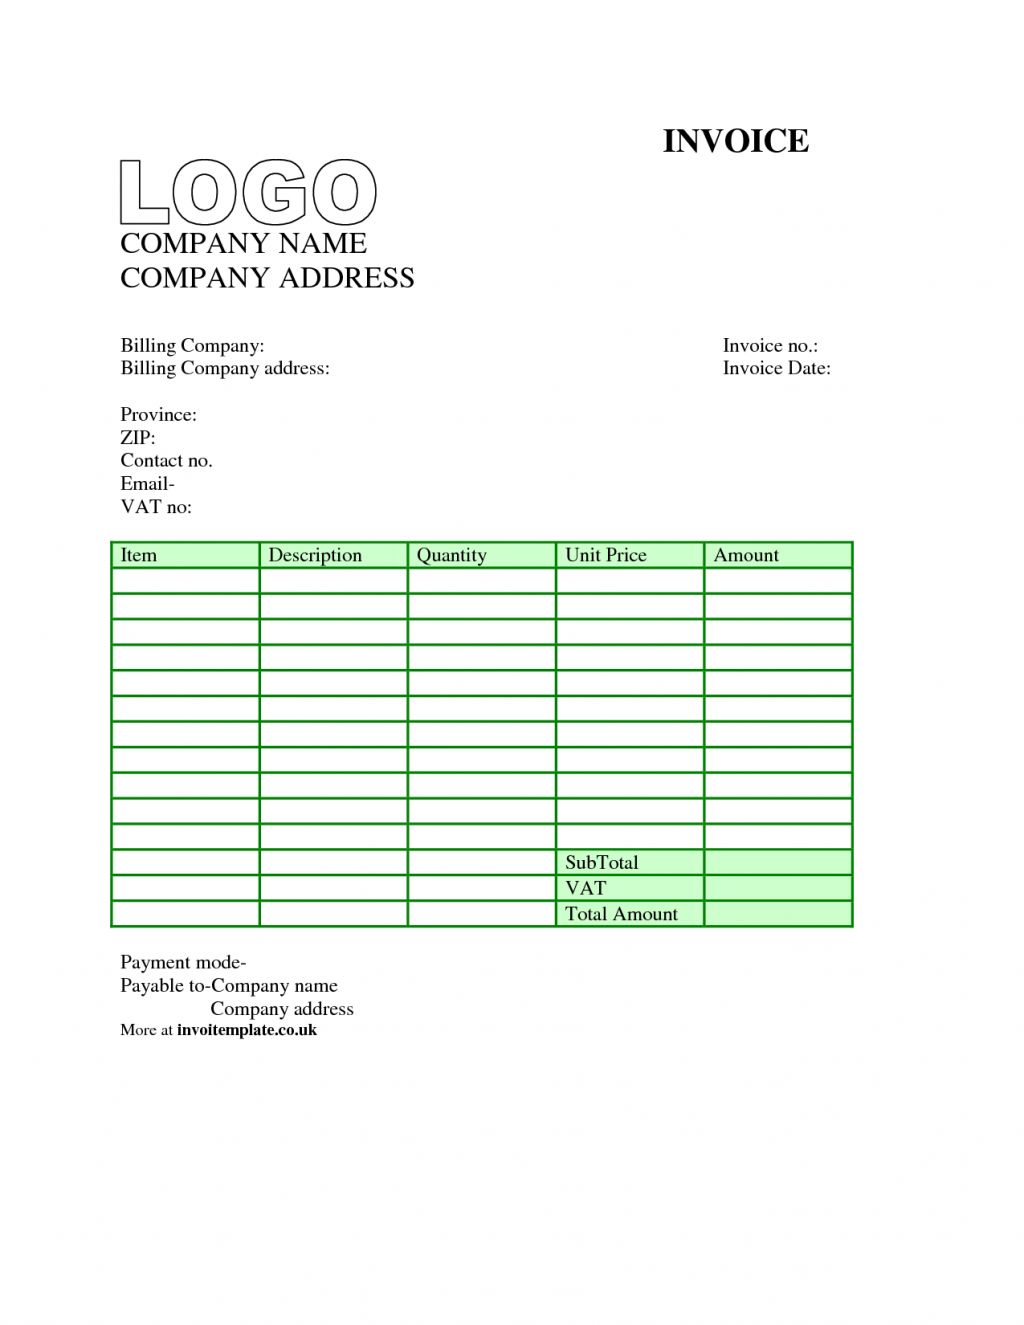 open invoice report excel template